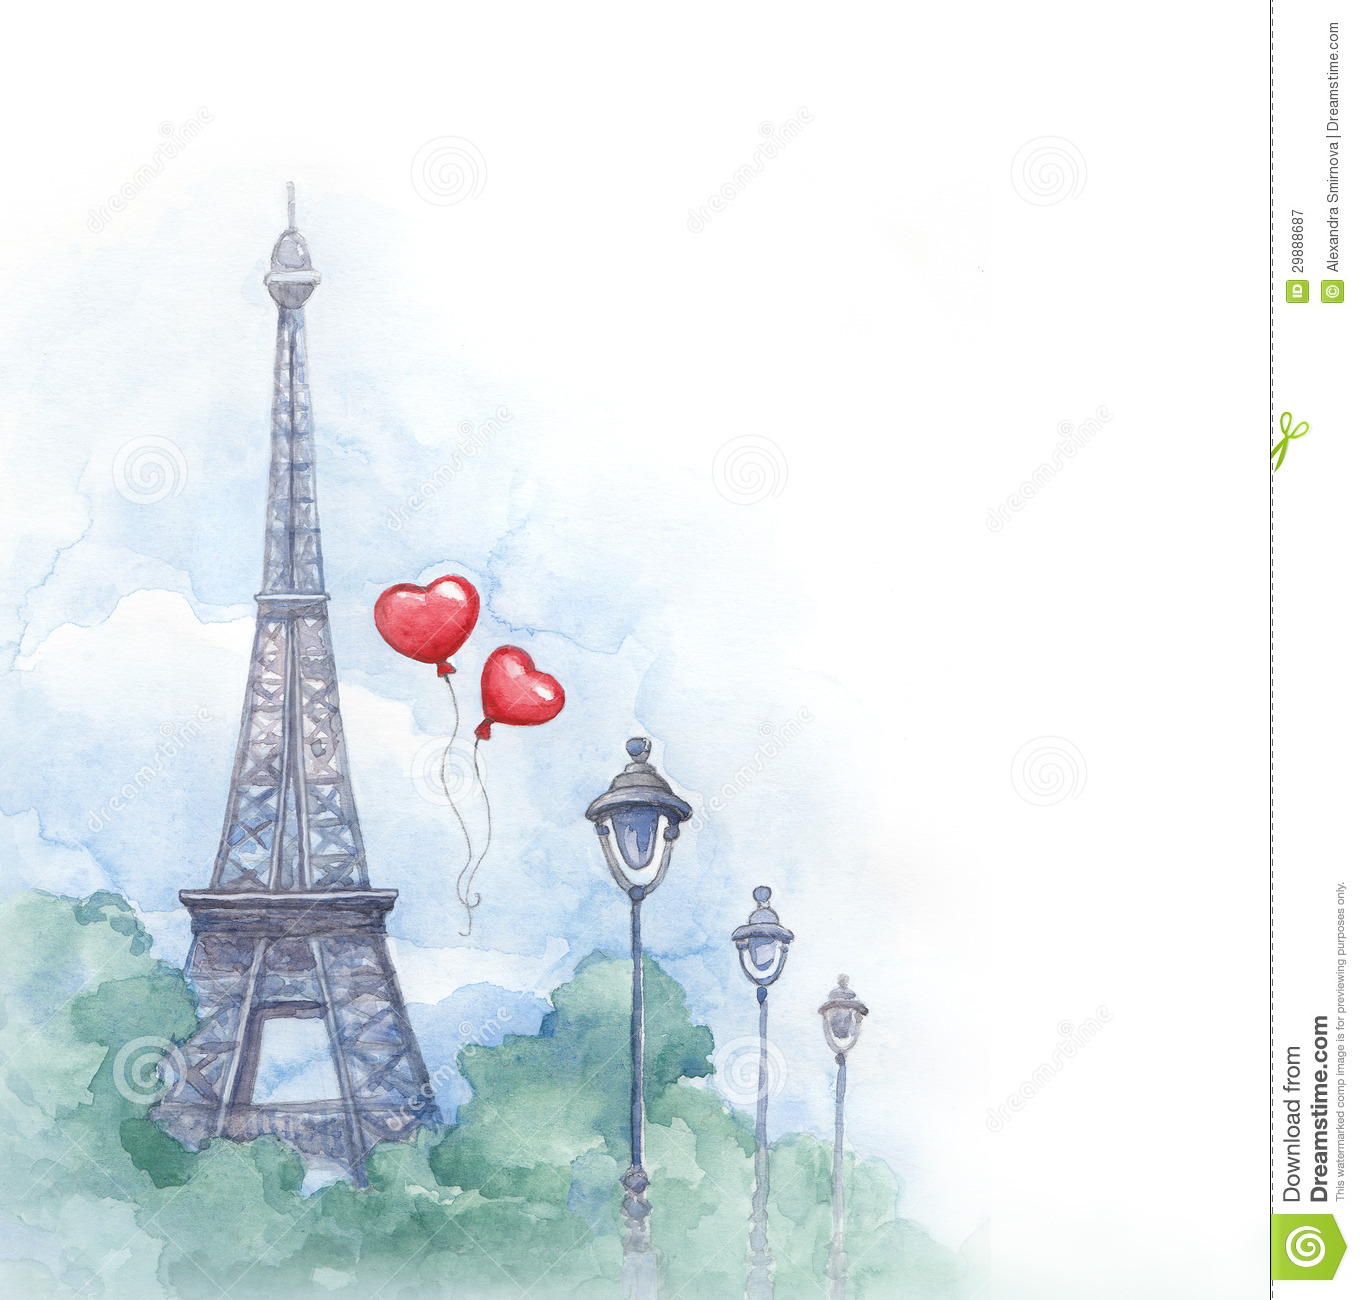 Watercolor Illustration Of Eiffel Tower Royalty Free Stock Photography